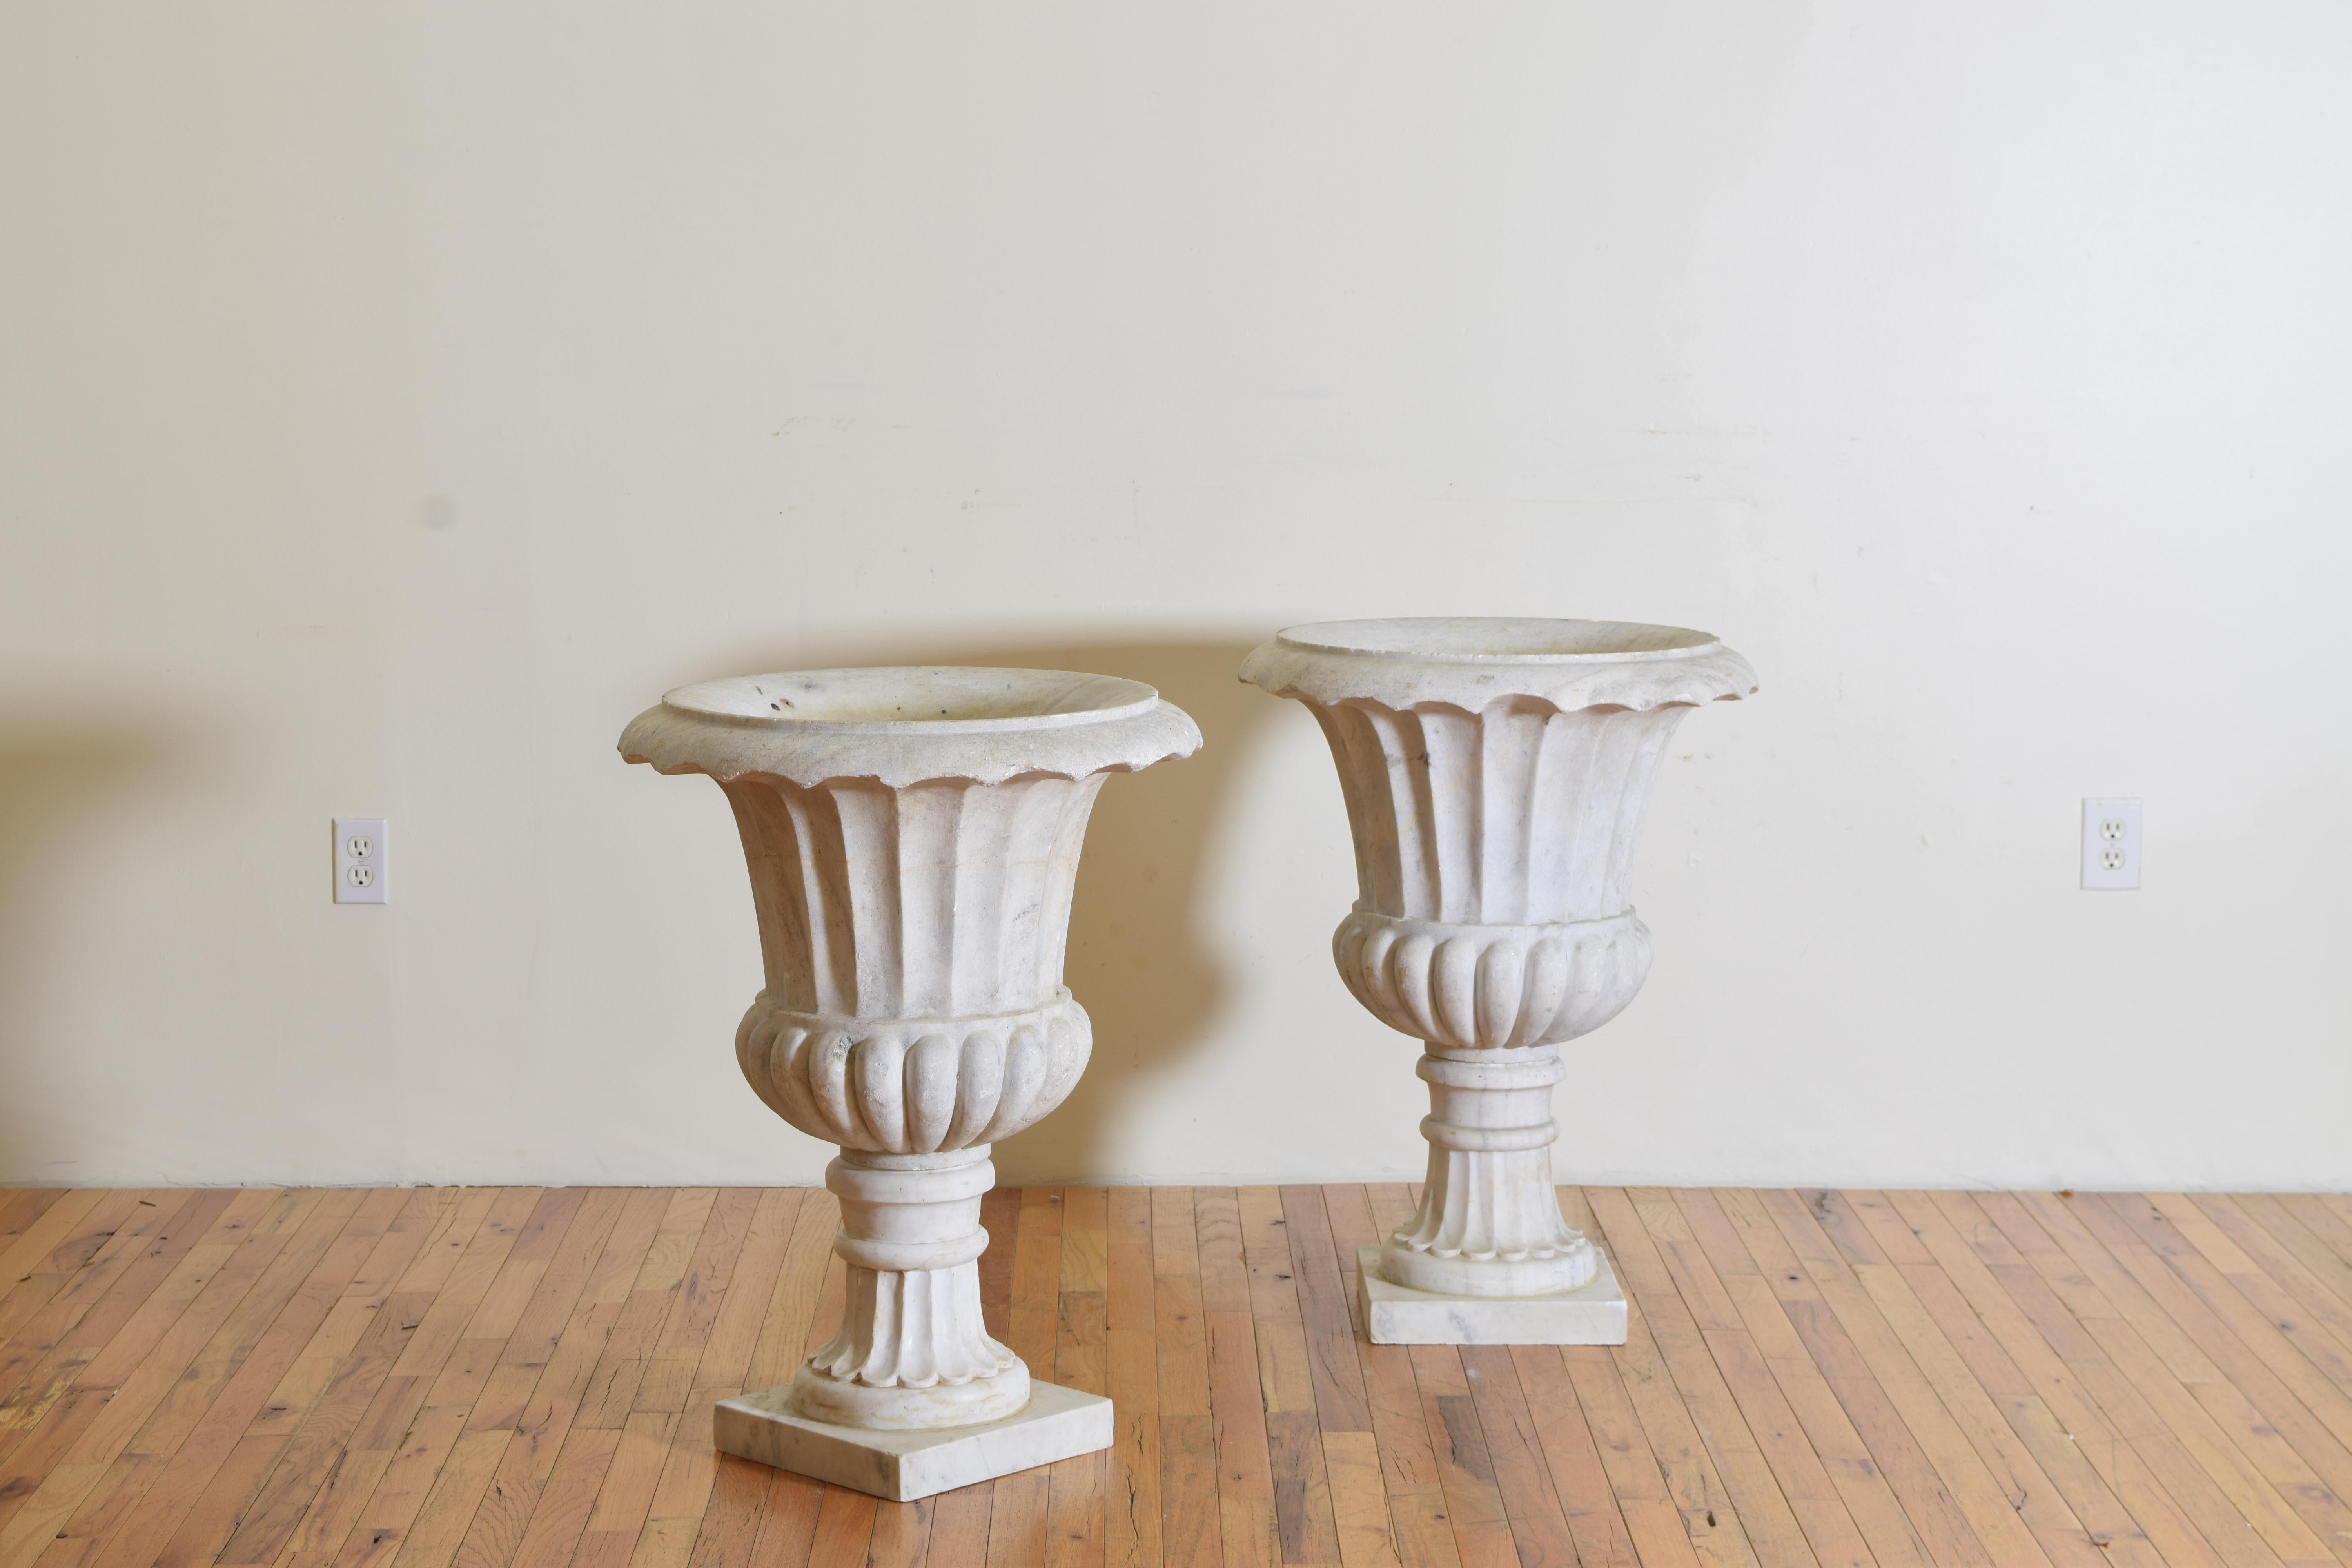 Carrara marble and from Genoa, Italy these two-piece urns are hand-carved and very solid, from the late 18th to early 19th century.